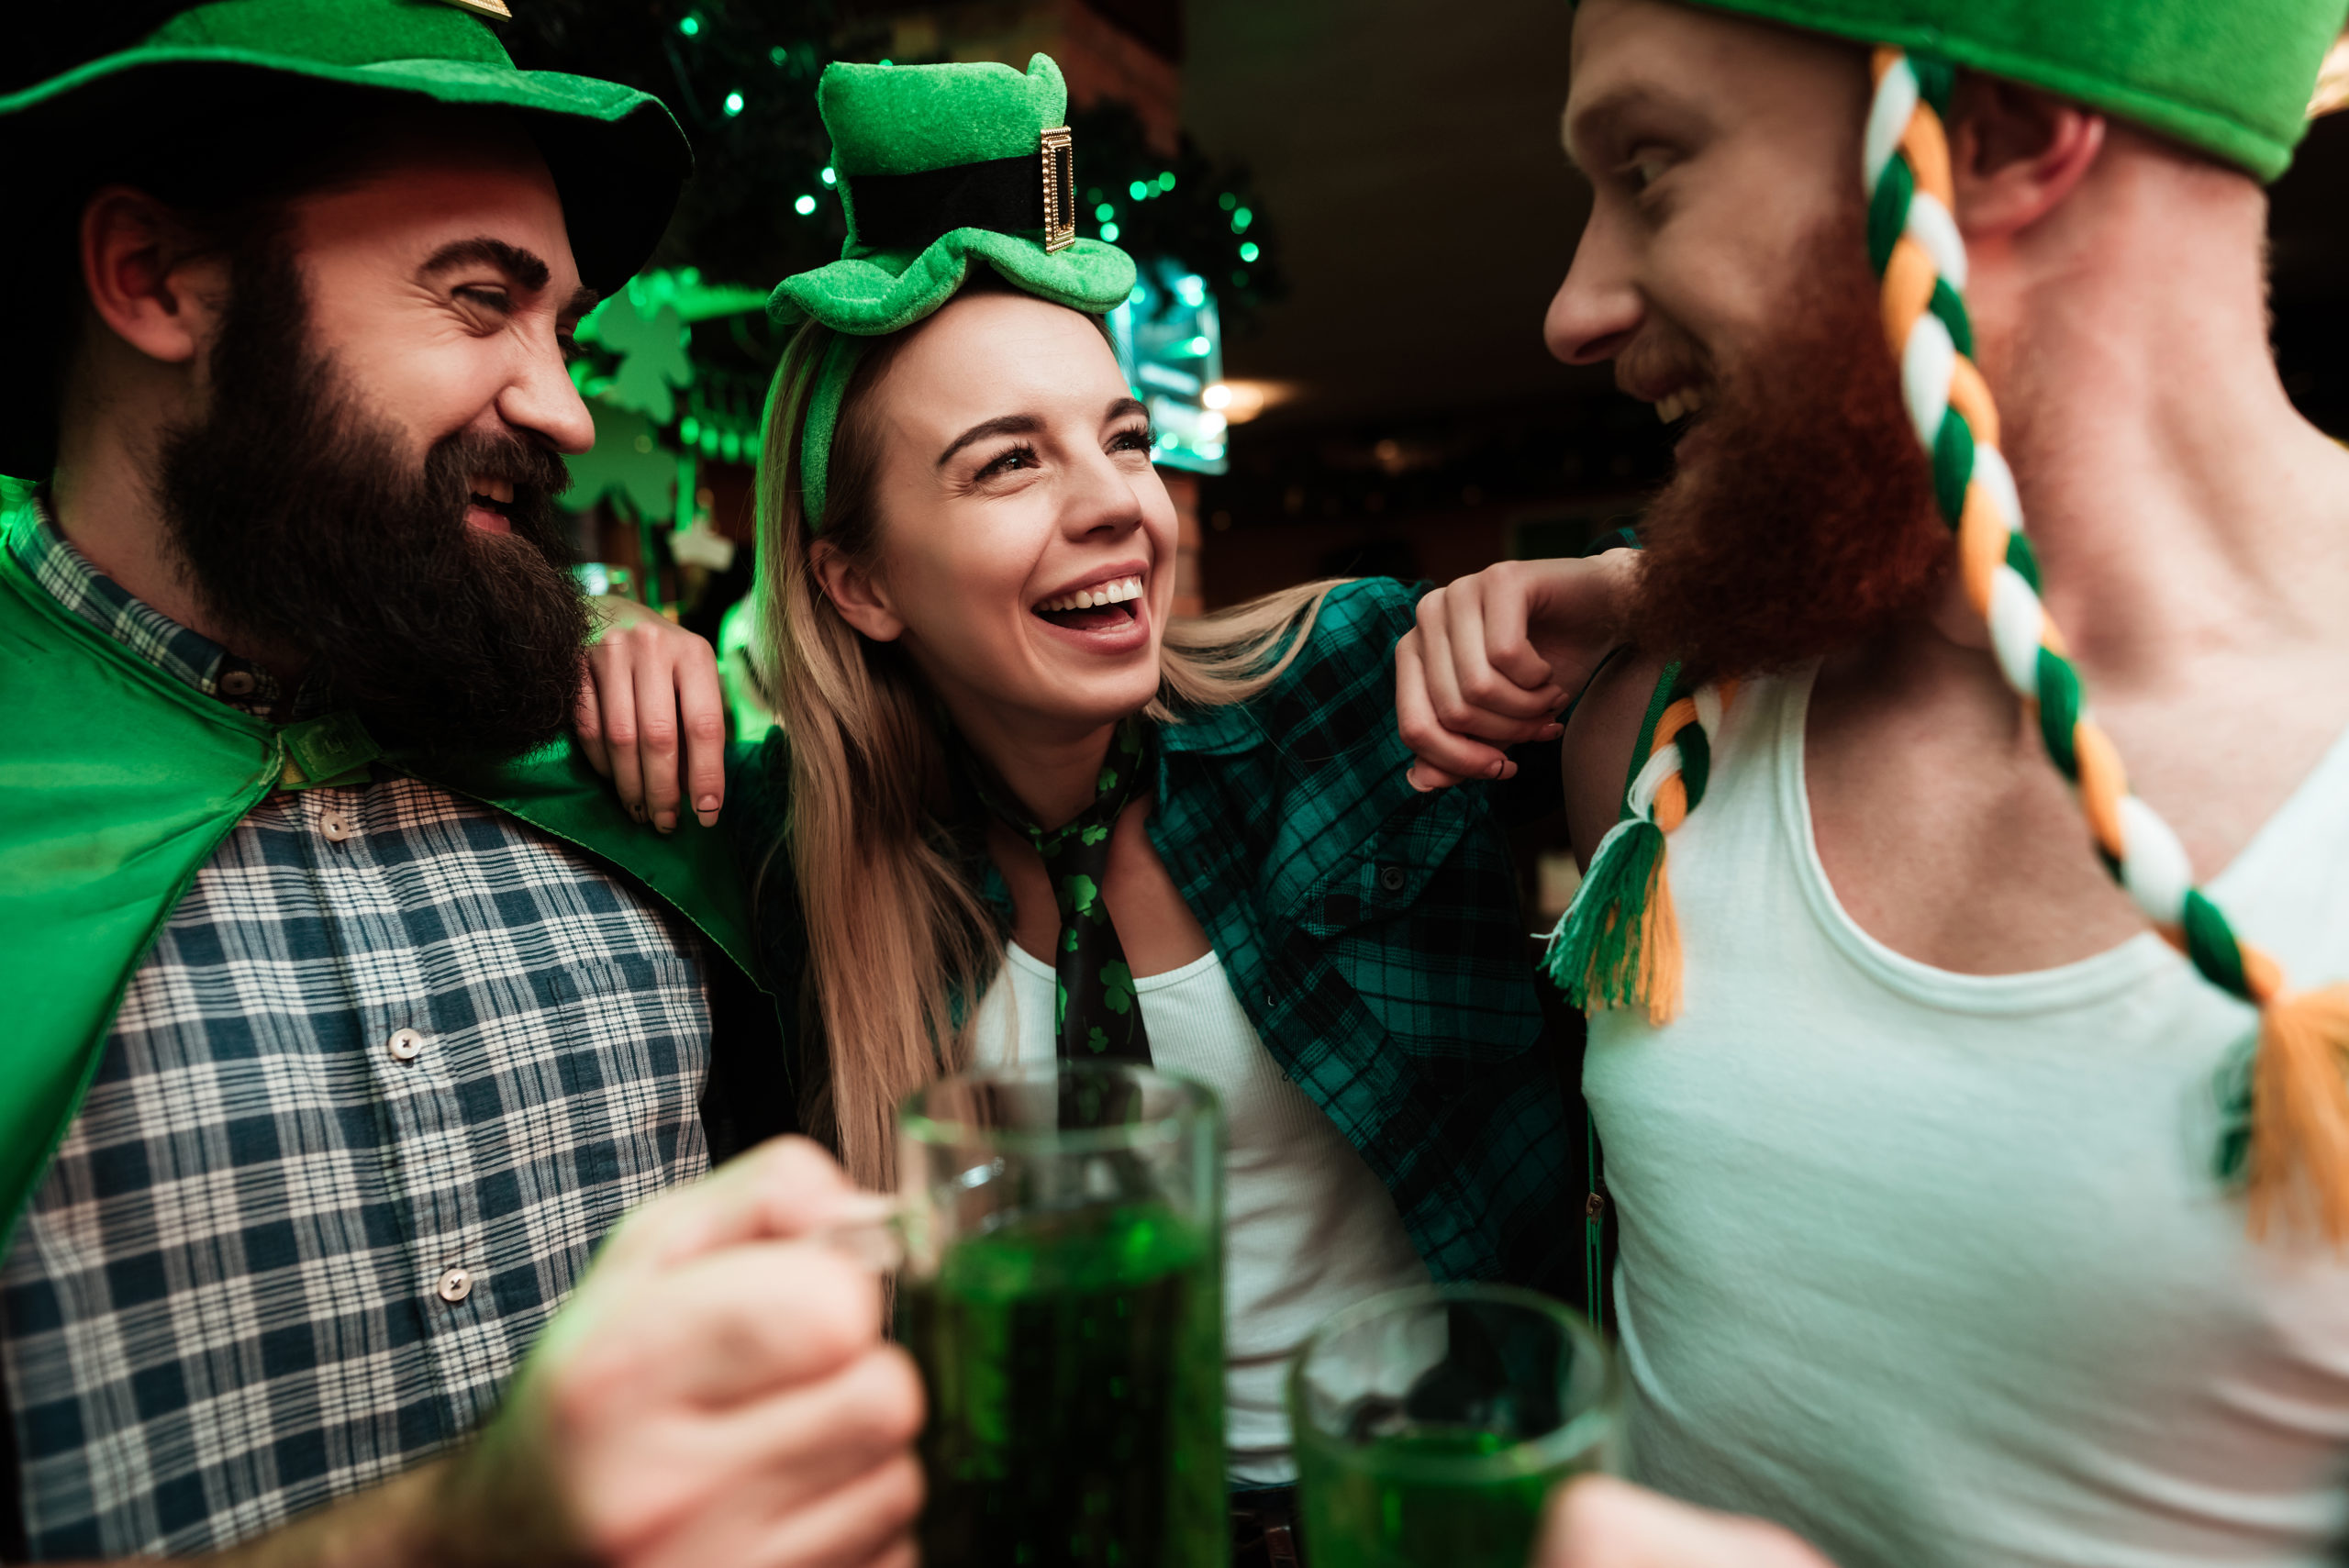 Group Drinking at St. Patrick's Day